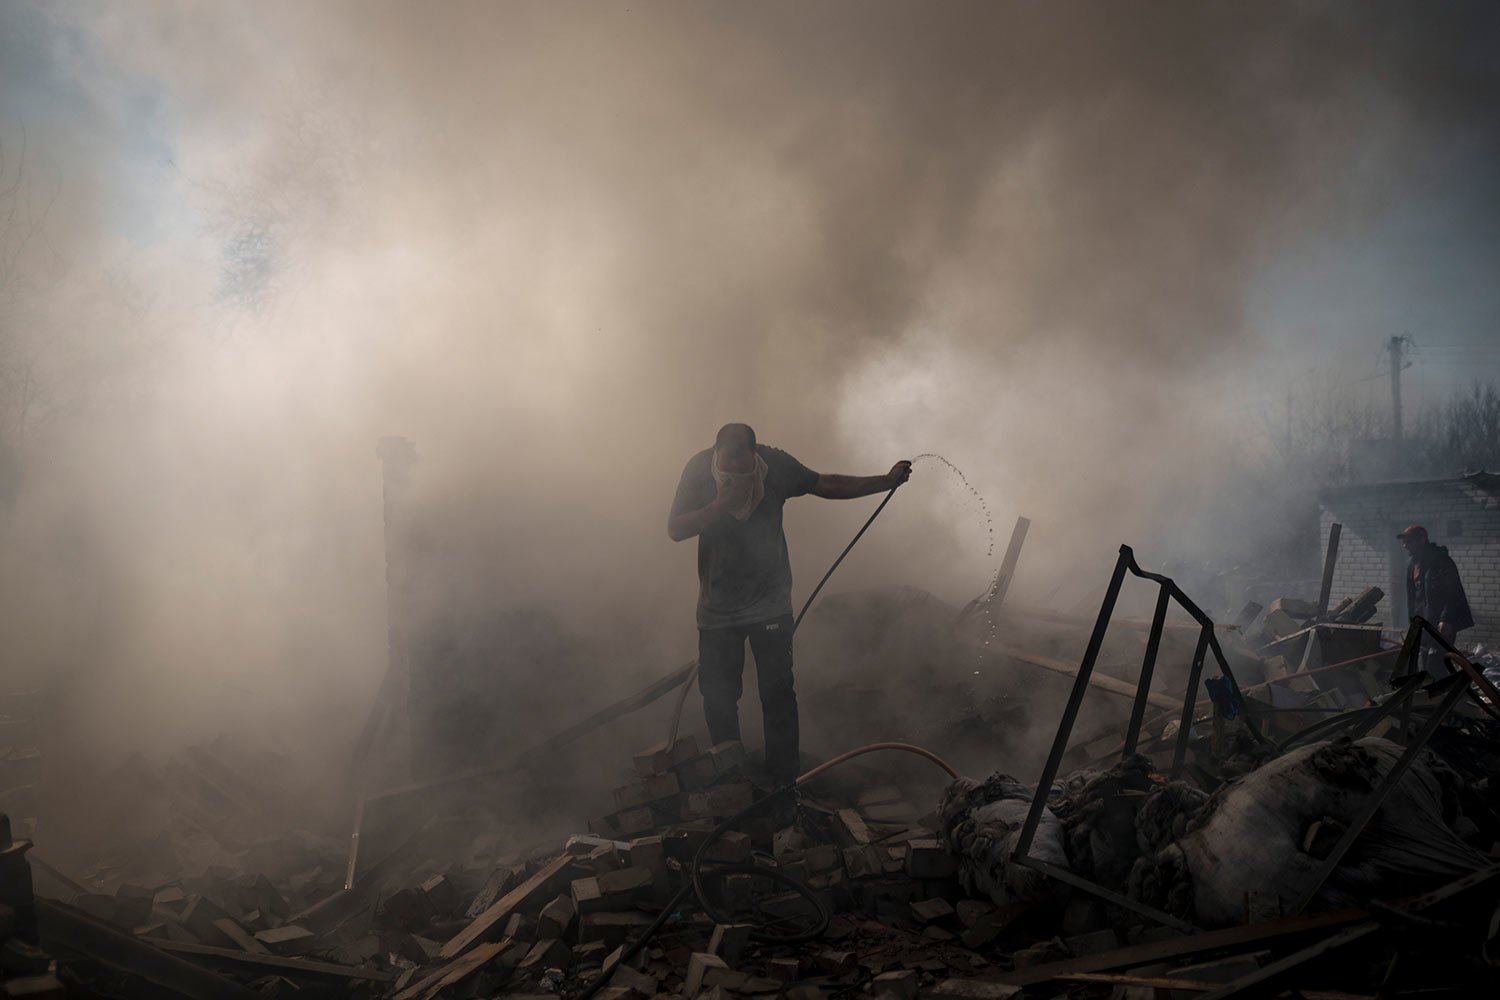  Neighbours try to extinguish the fire of a house, destroyed after a Russian attack in Kharkiv, Ukraine, Thursday, March 24, 2022. (AP Photo/Felipe Dana) 